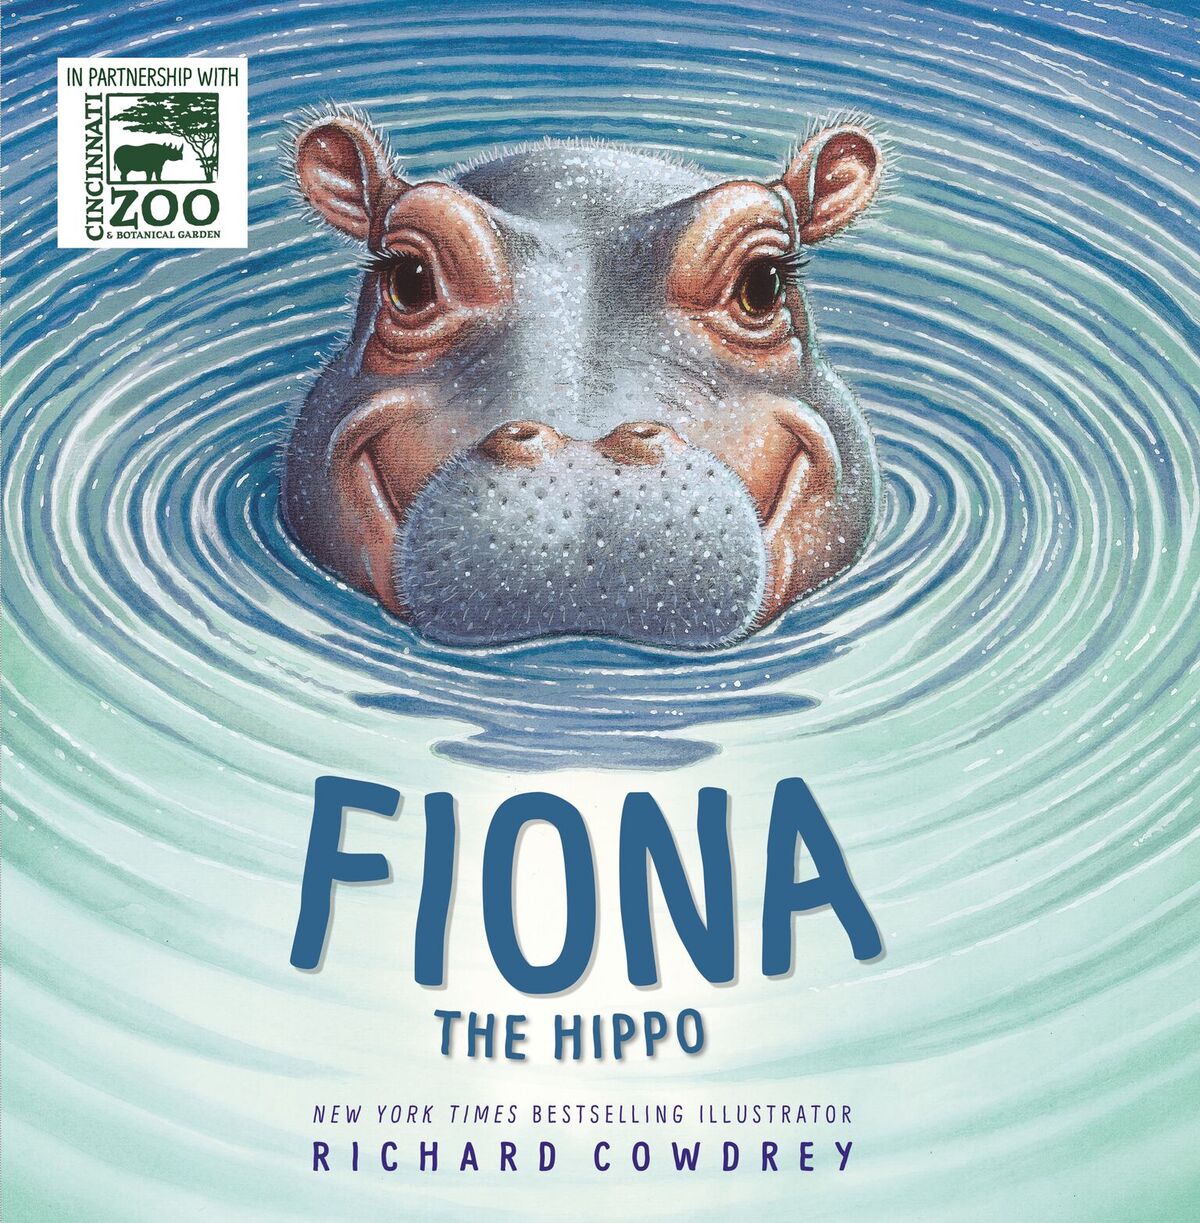 fiona the hippo book   giveaway